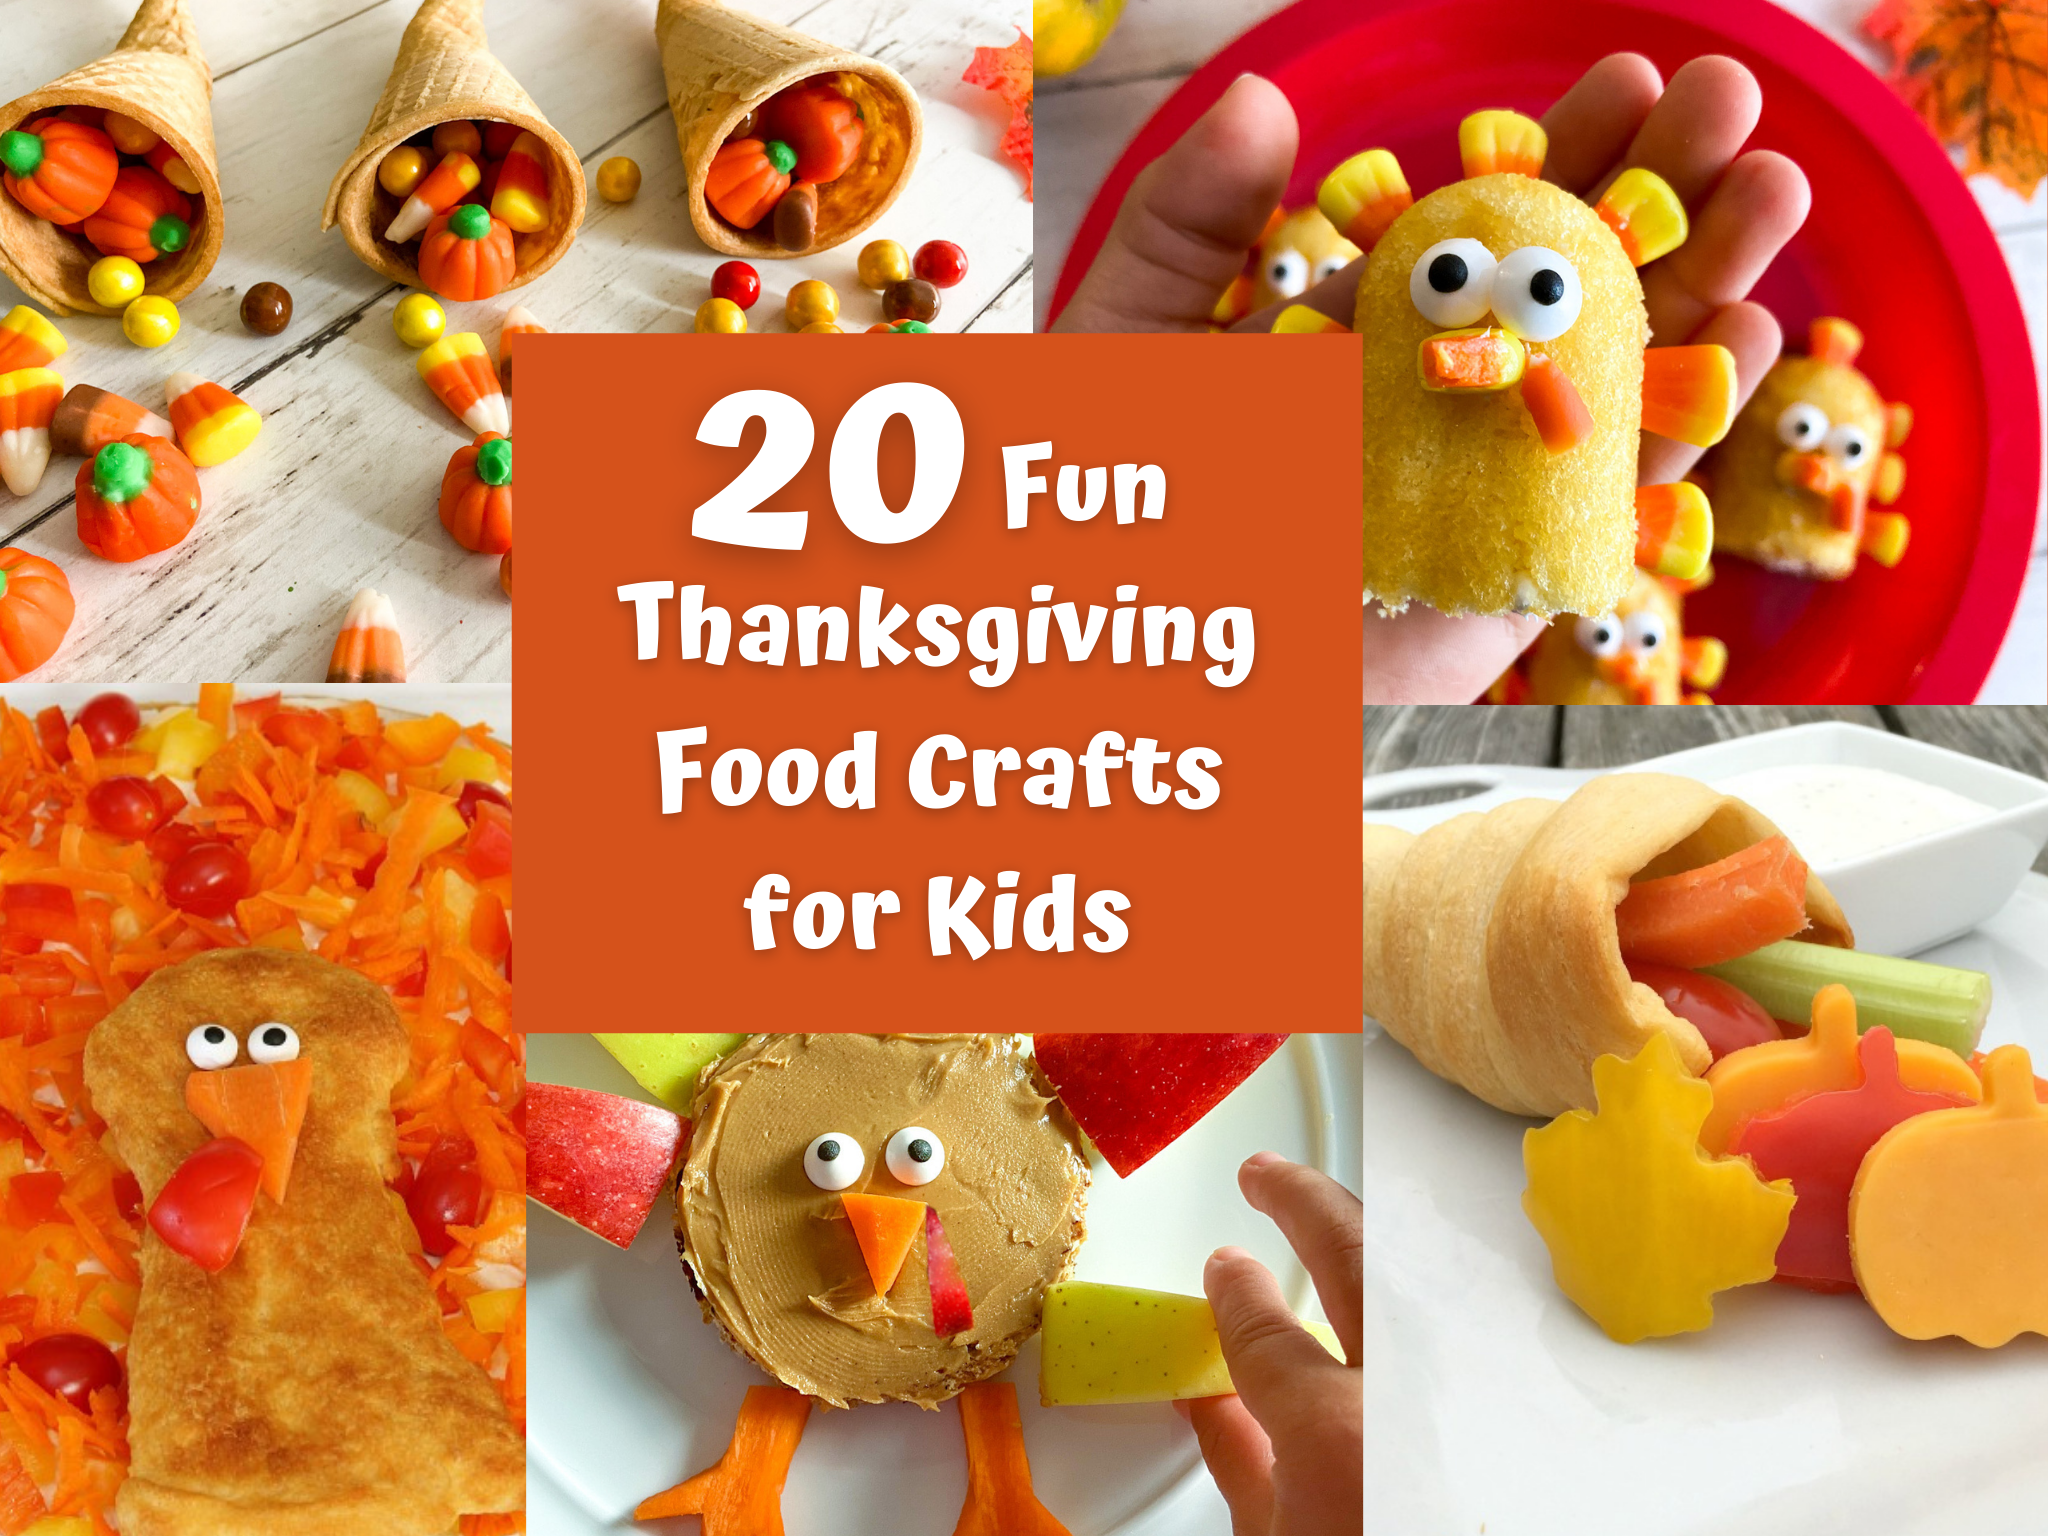 55 Easy Thanksgiving Craft Ideas for Adults and Kids